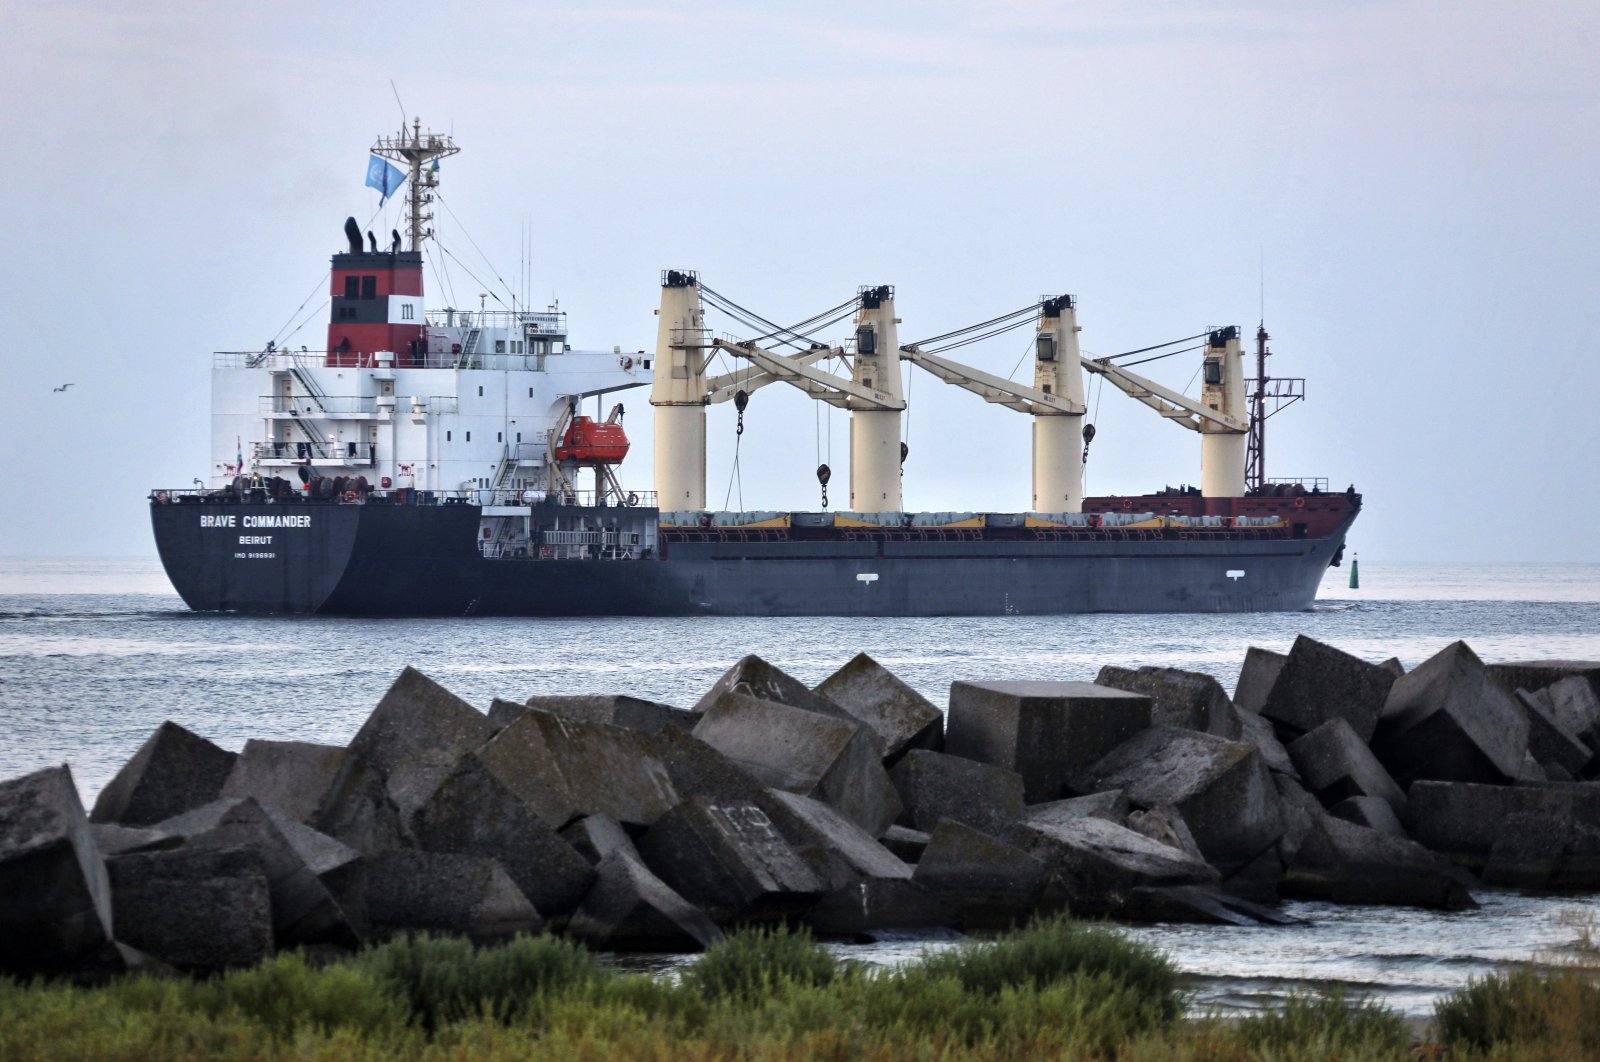 The Brave Commander bulk carrier makes its way from the Pivdennyi Seaport near Odessa, Ukraine, Aug. 16, 2022. (AP Photo)